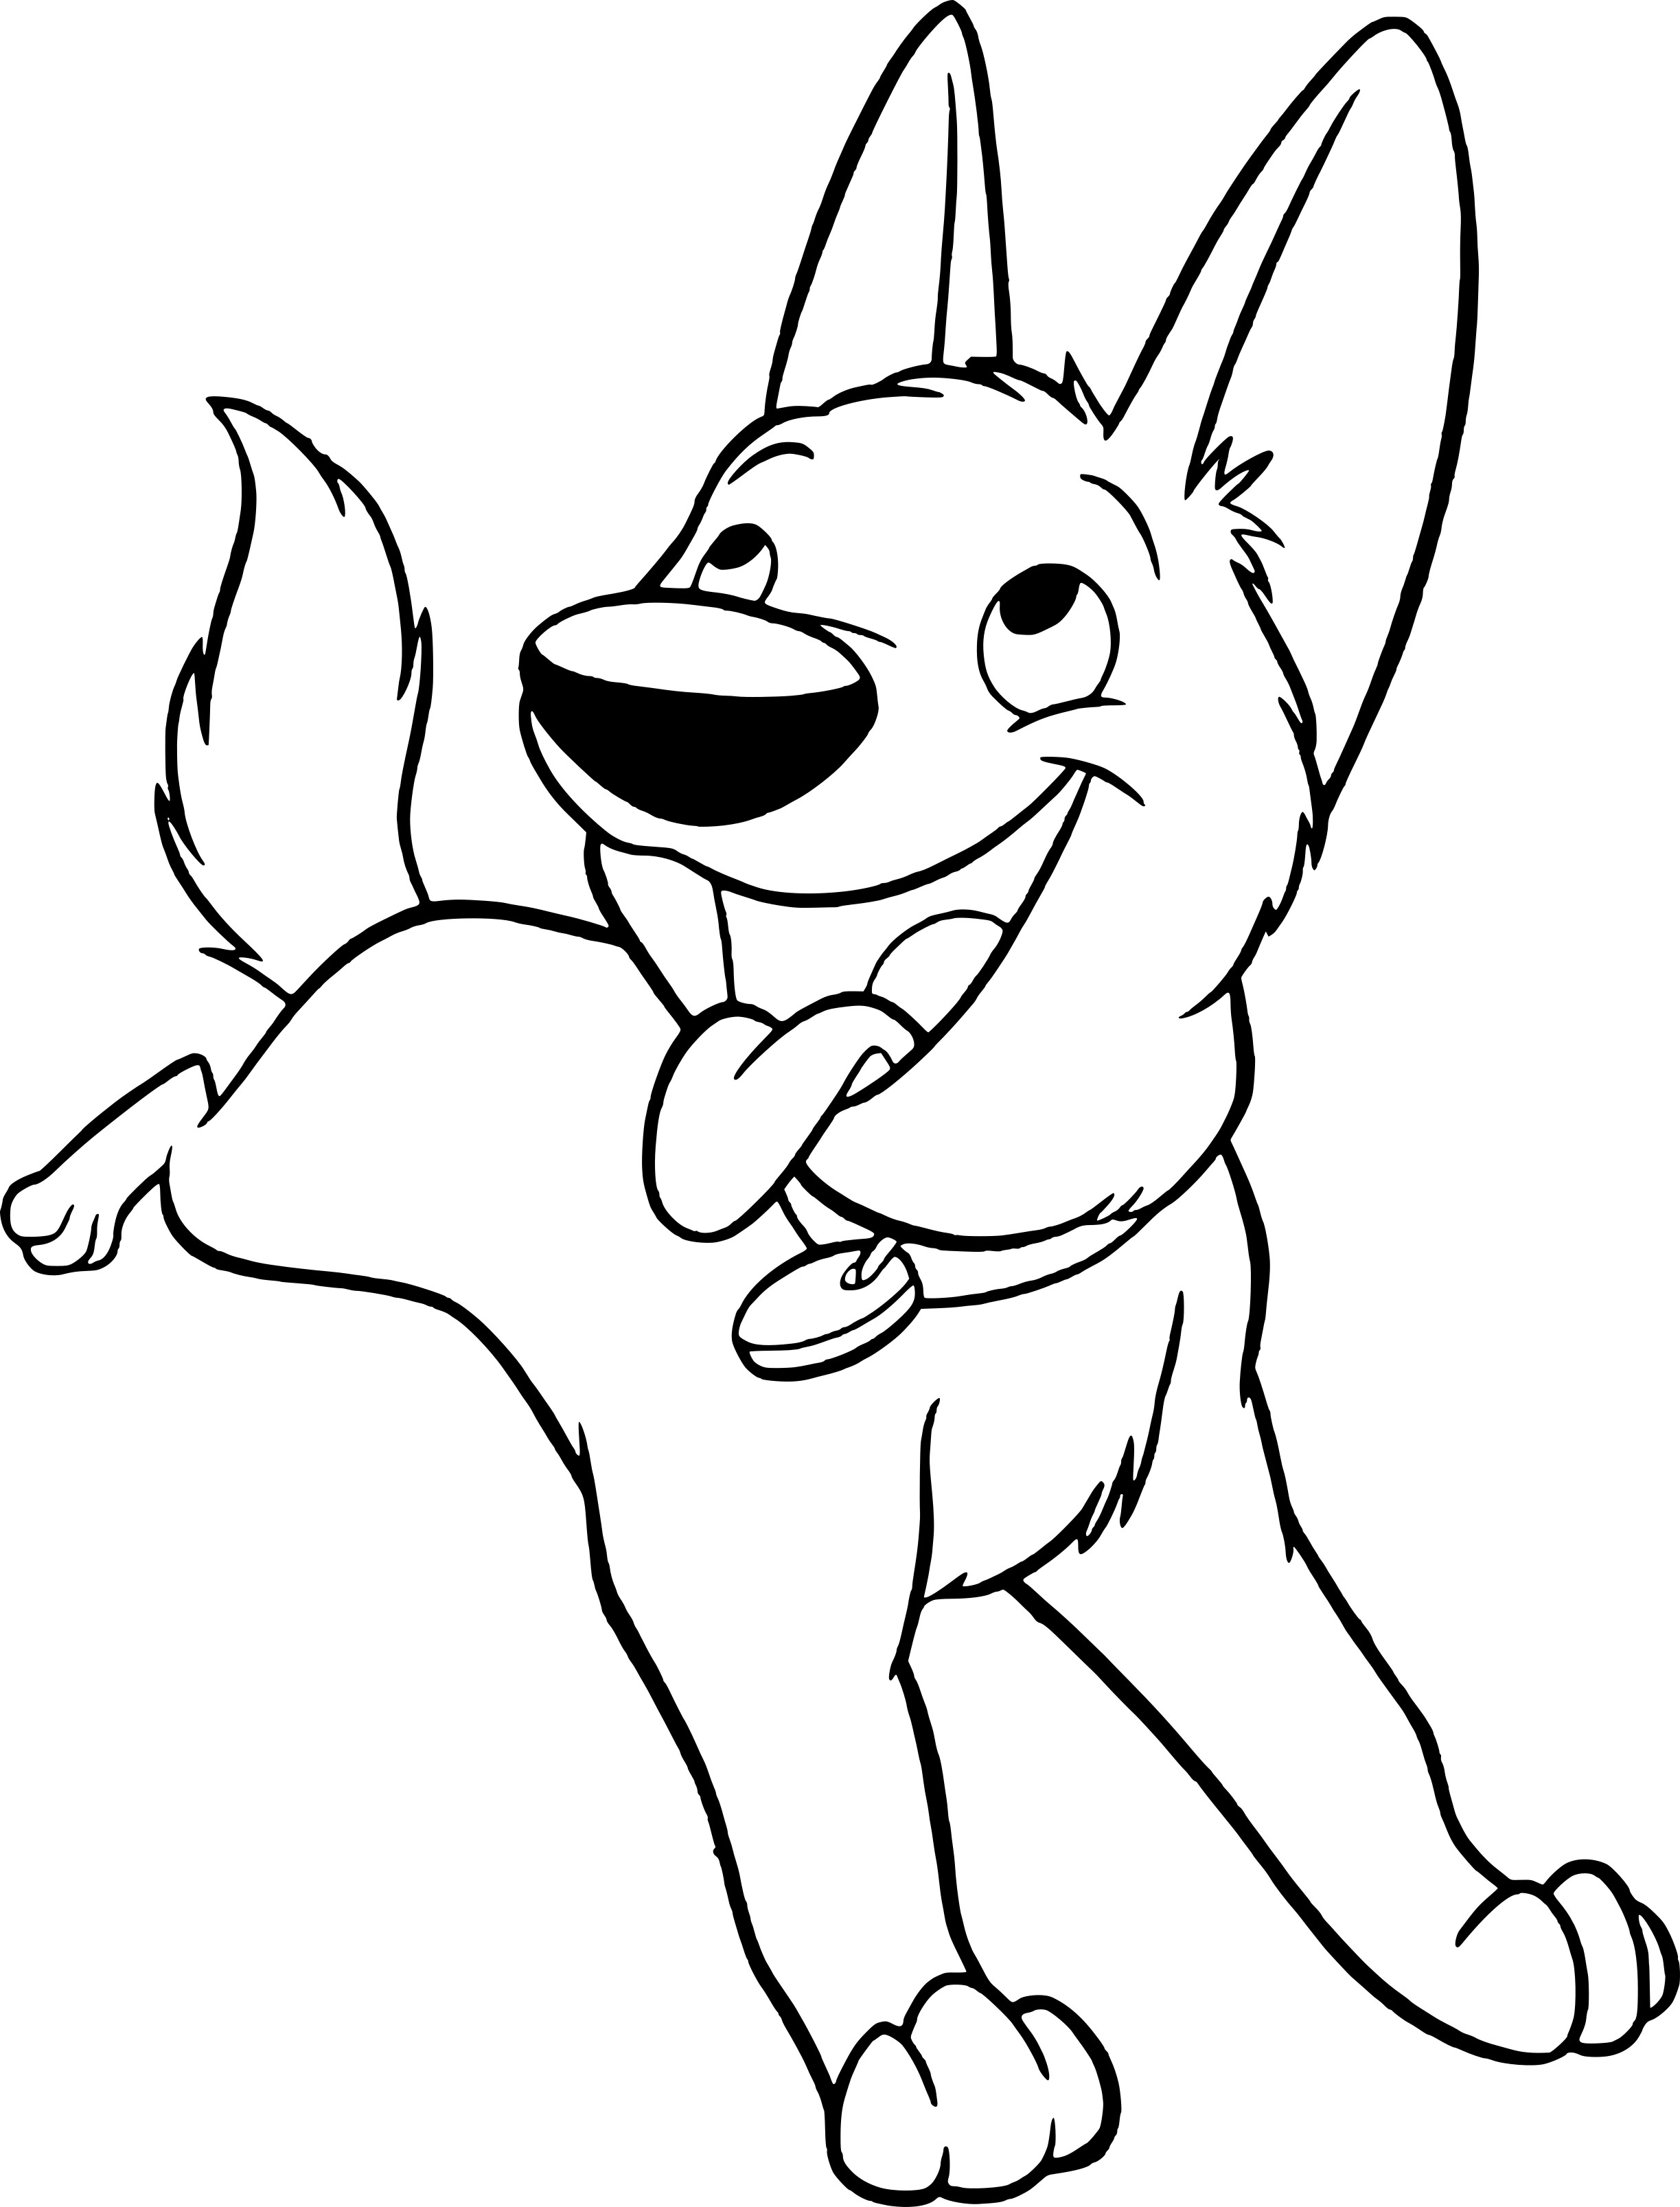 Free Volt coloring page